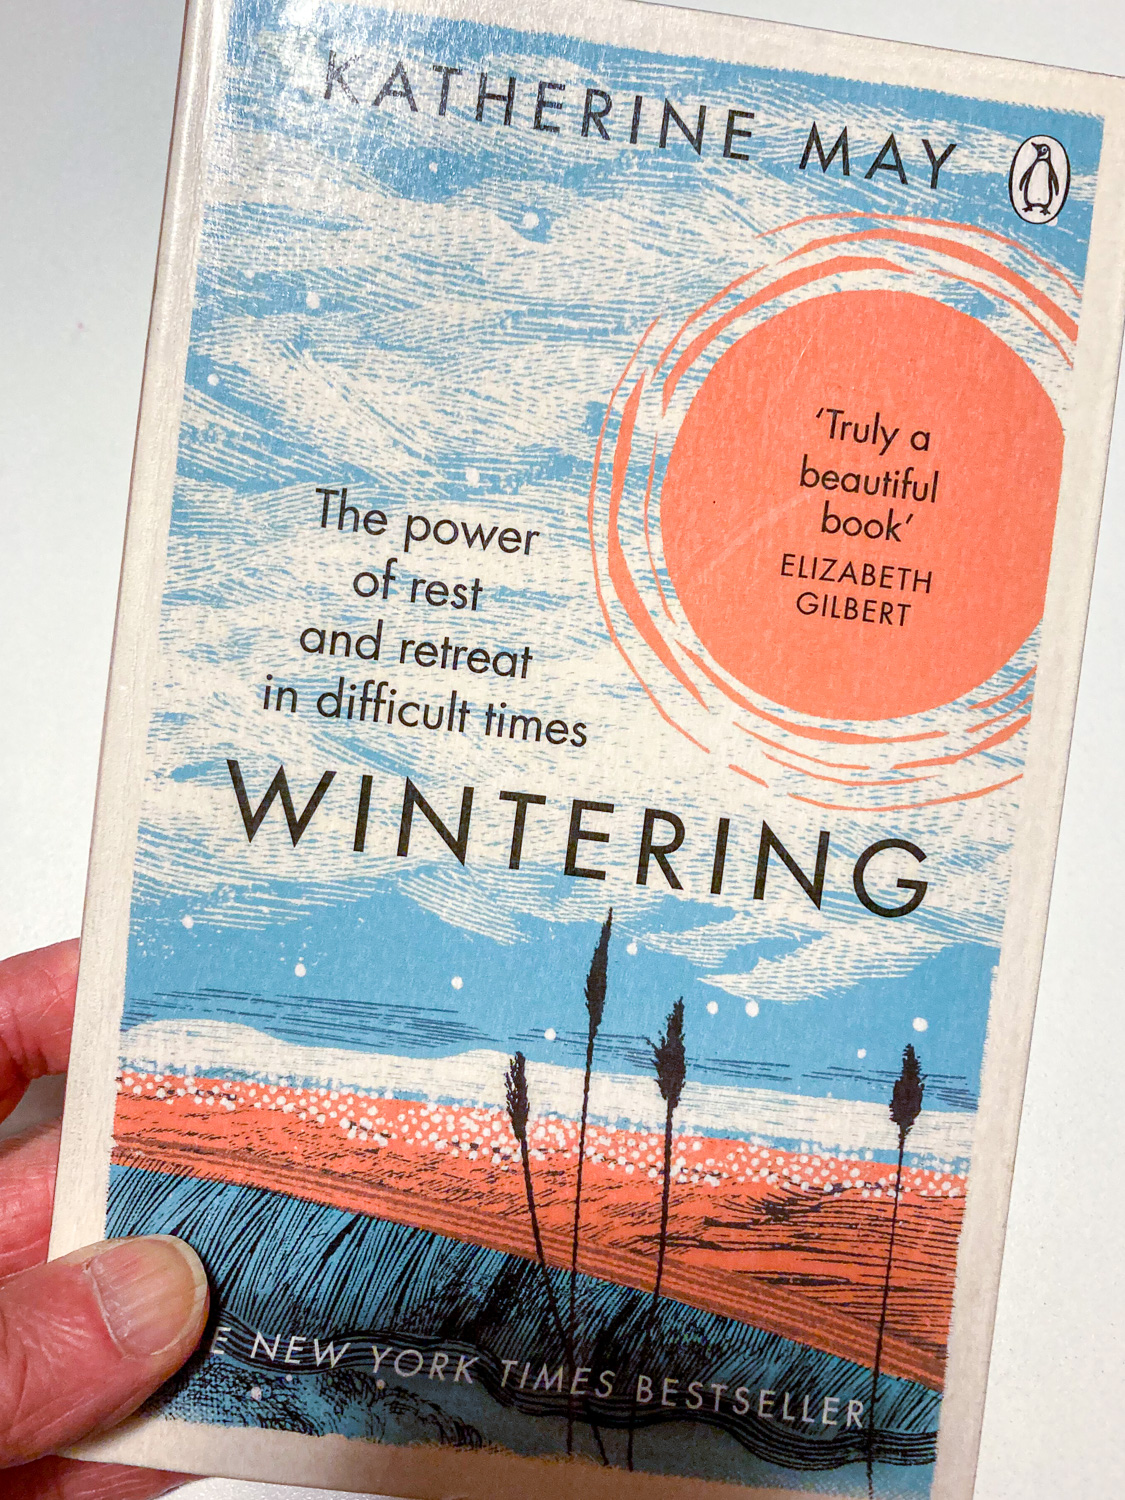 The cover of a book called Wintering by Katherine May, with blue and orange graphics on the sea and sky